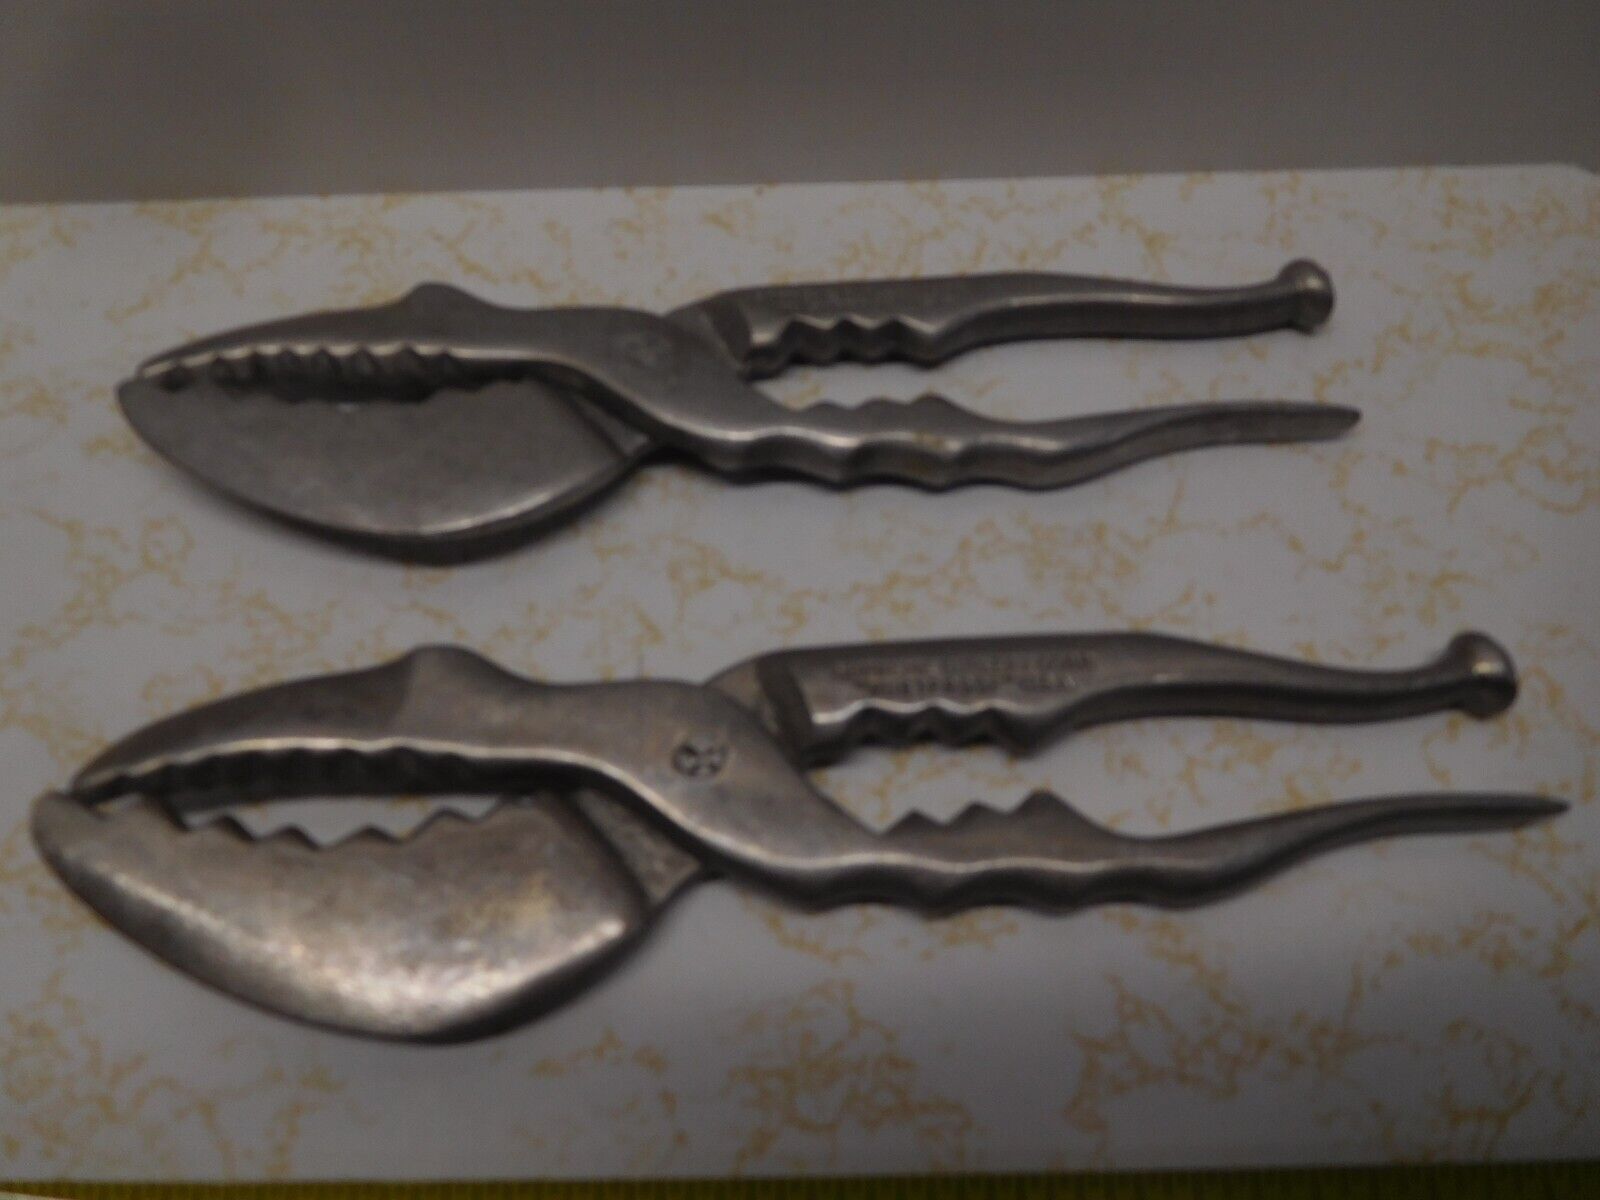 2 Vintage Supreme Cutlery Lobster Claw Shaped Lobster/Nut Crackers